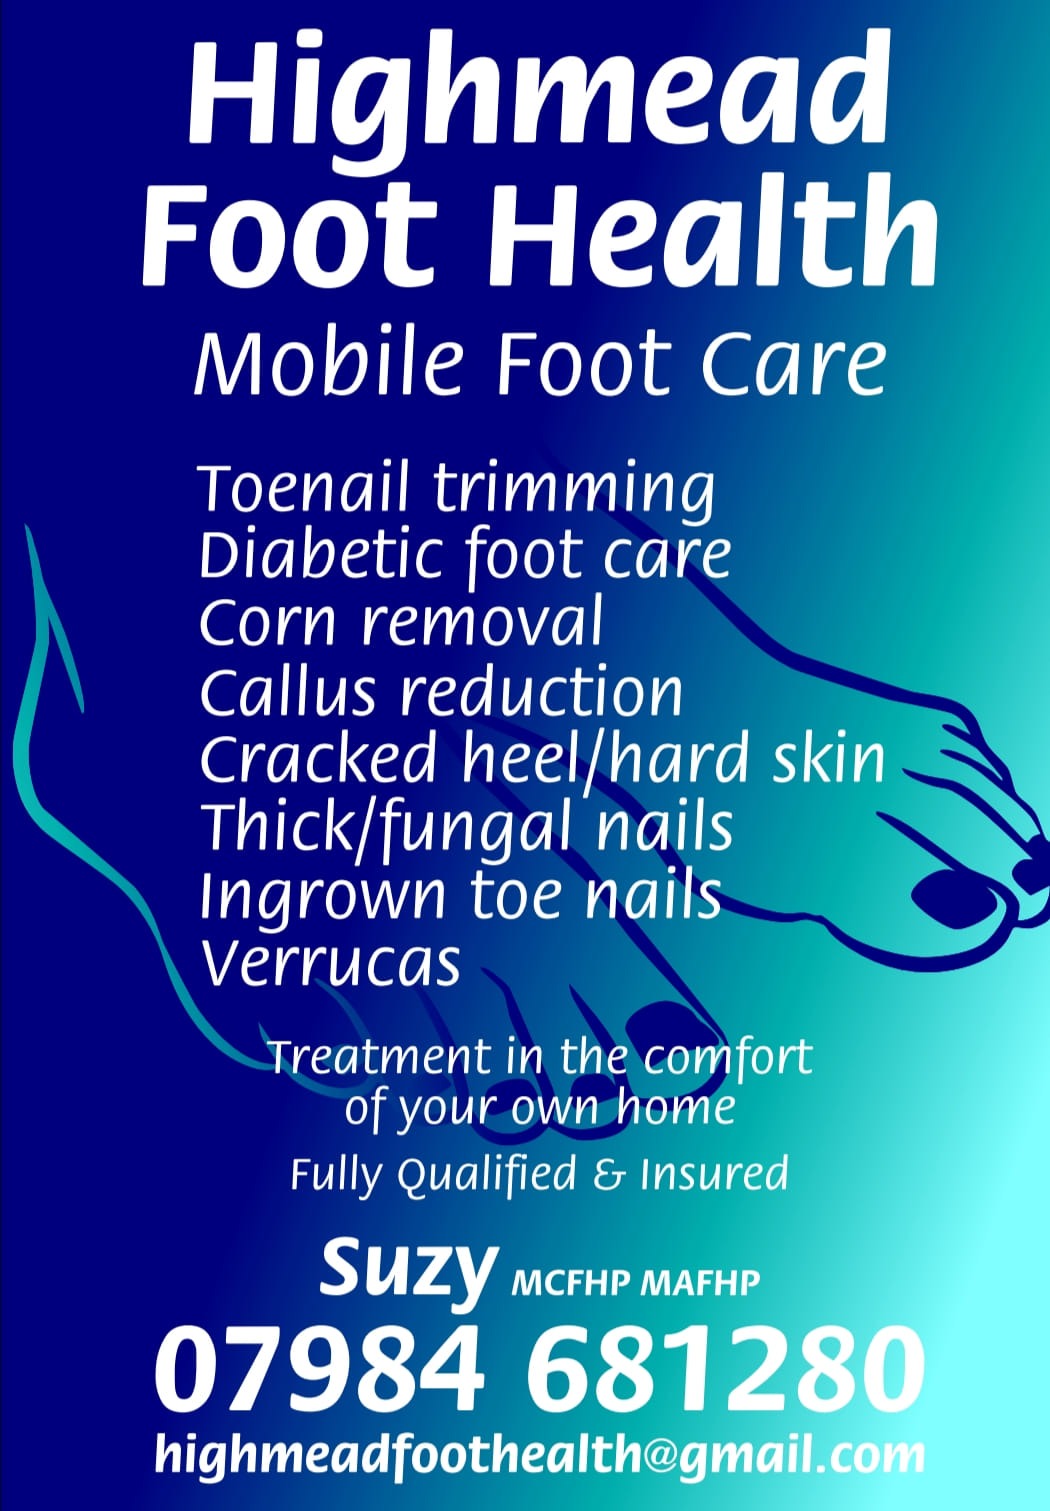 Highmead Foot Health - Treatment in the comfort of your home